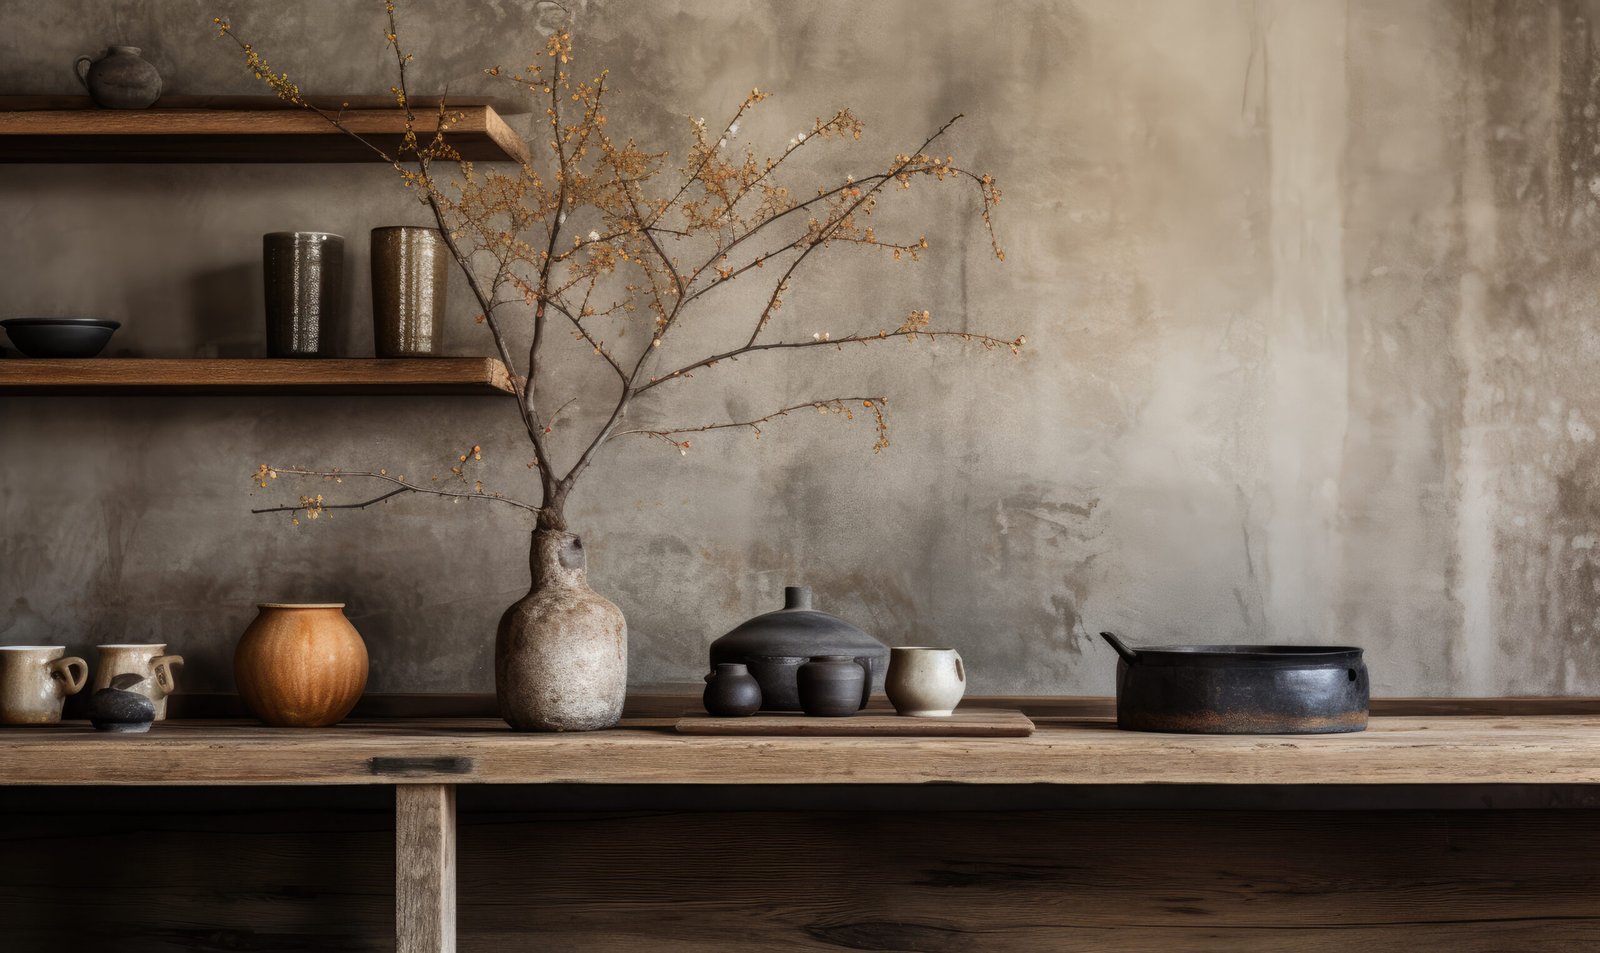 Wabi-sabi interior with vases on a shelf and table, capturing the essence of serene simplicity.